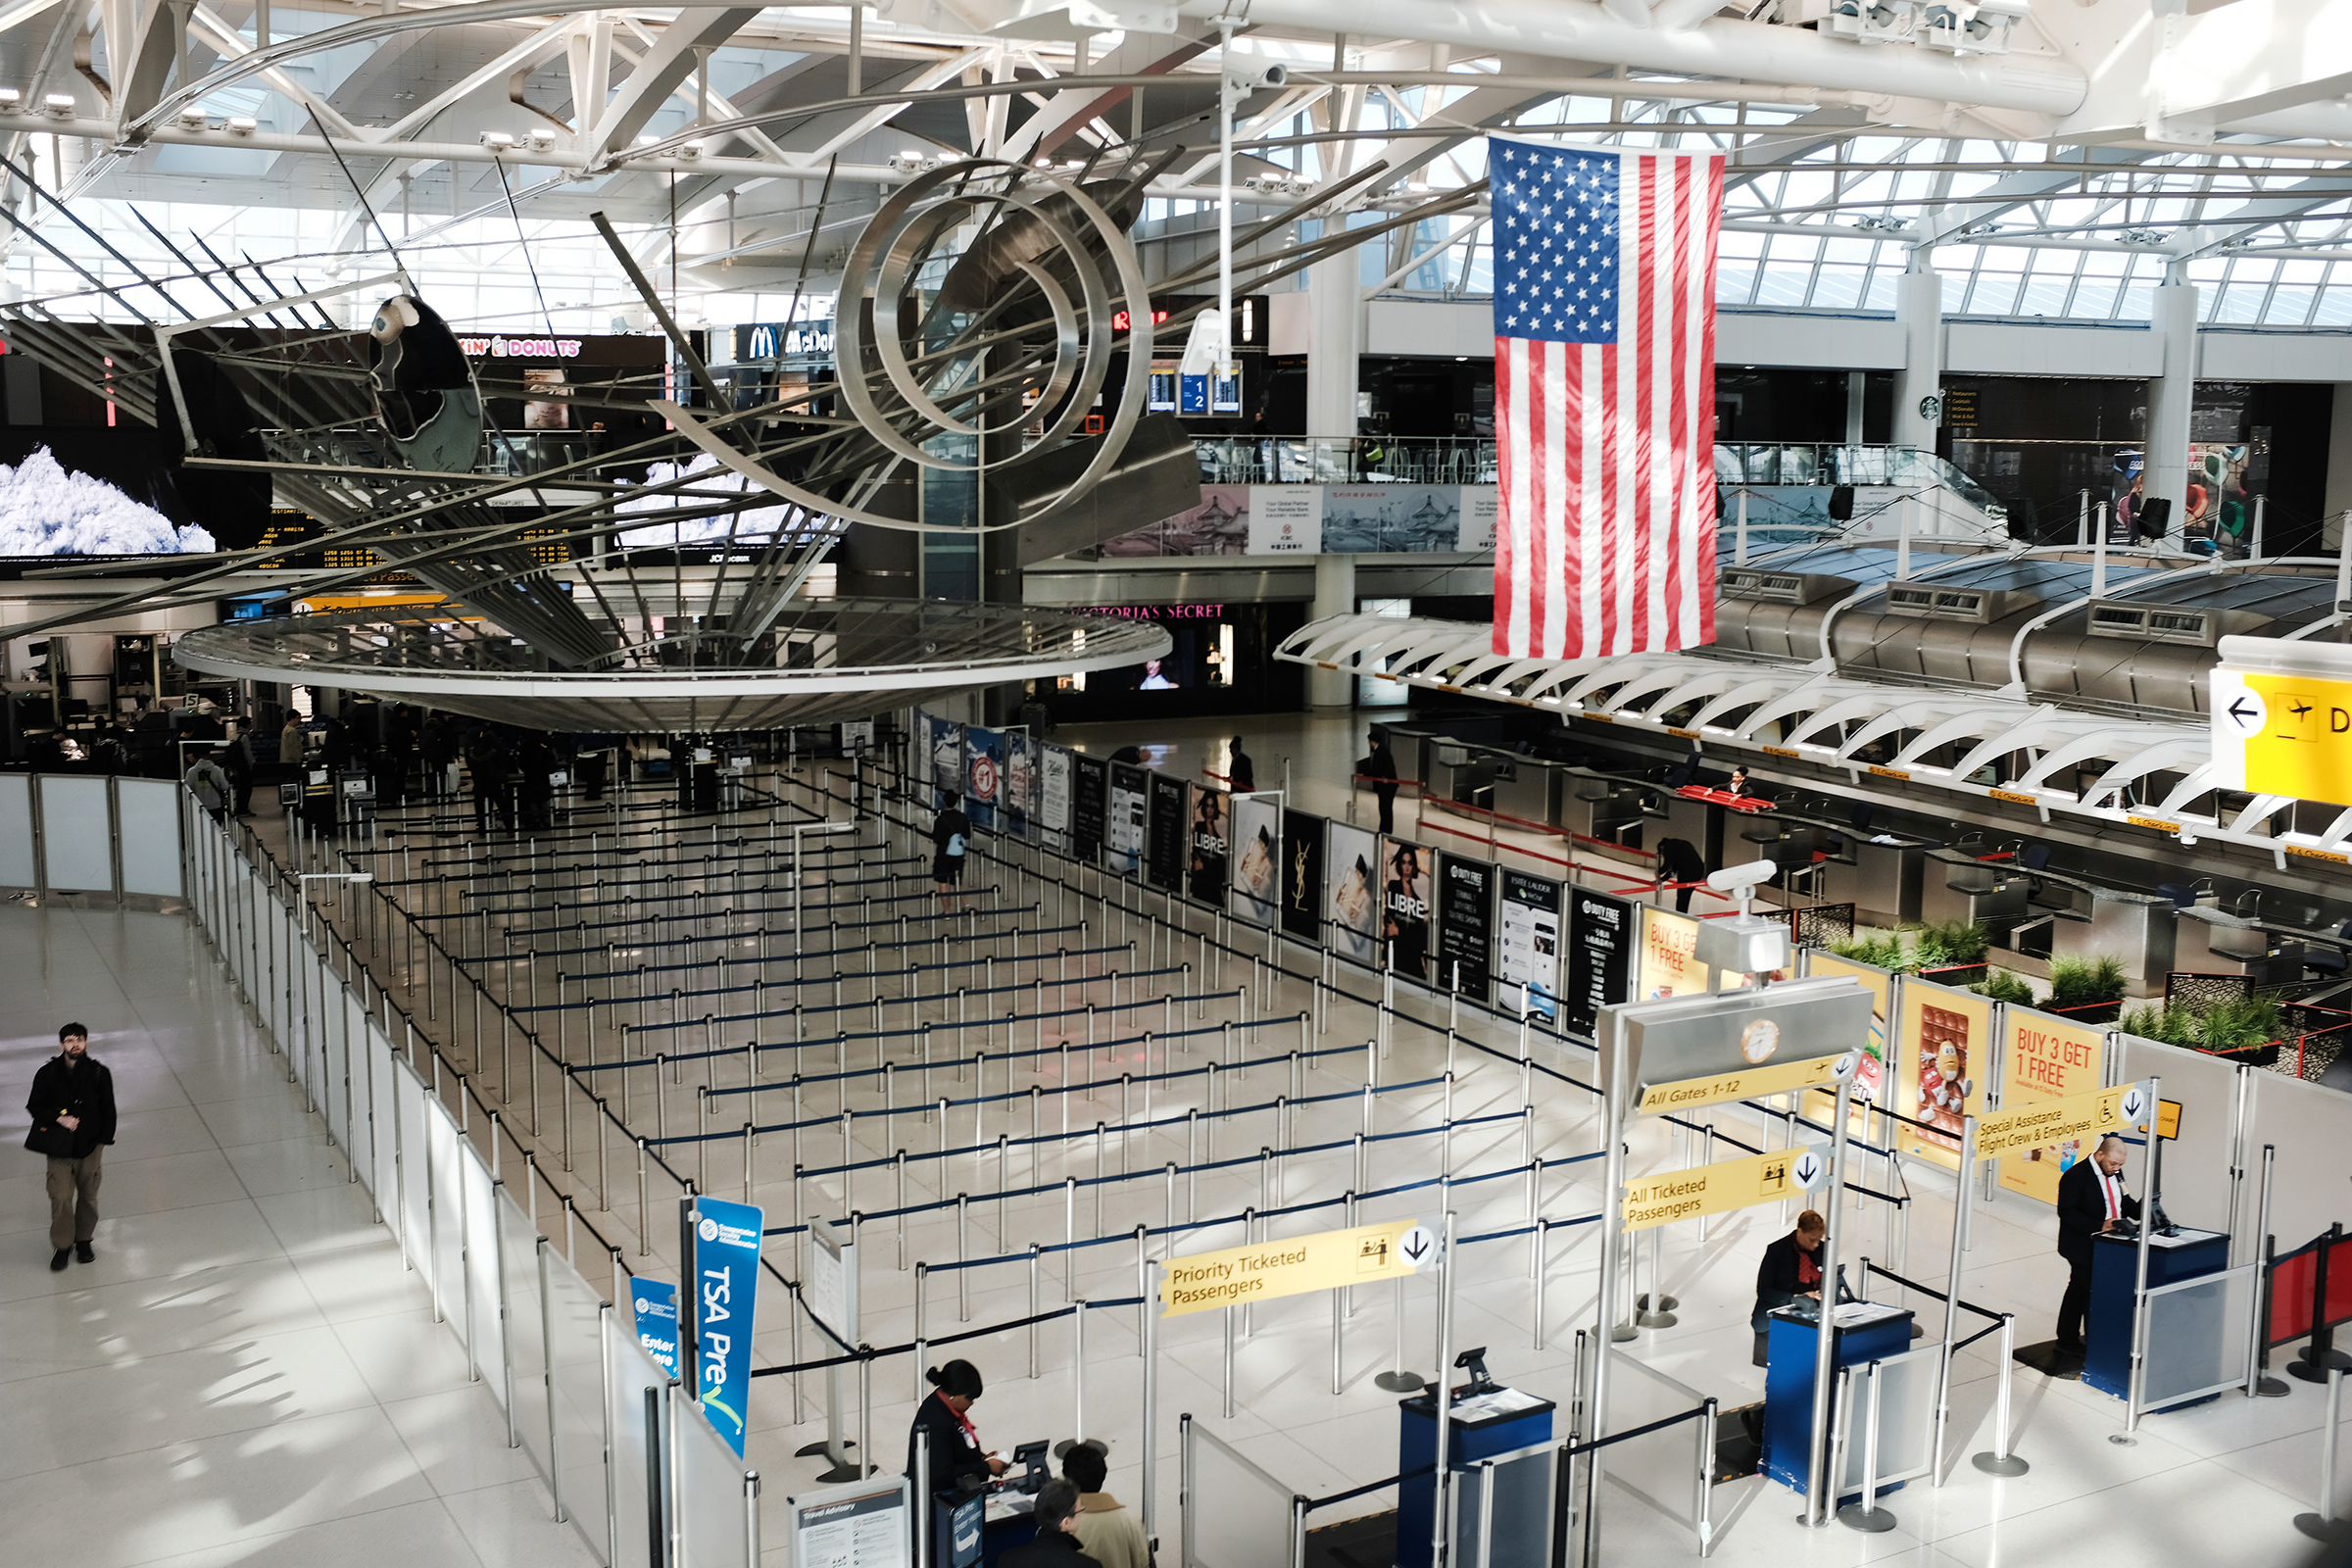 A sparse international departures terminal at John F. Kennedy International Airport in New York City on March 7. Days later, as concerns over the coronavirus grew, President Trump announced restrictions on travelers from Europe. (Spencer Platt—Getty Images)